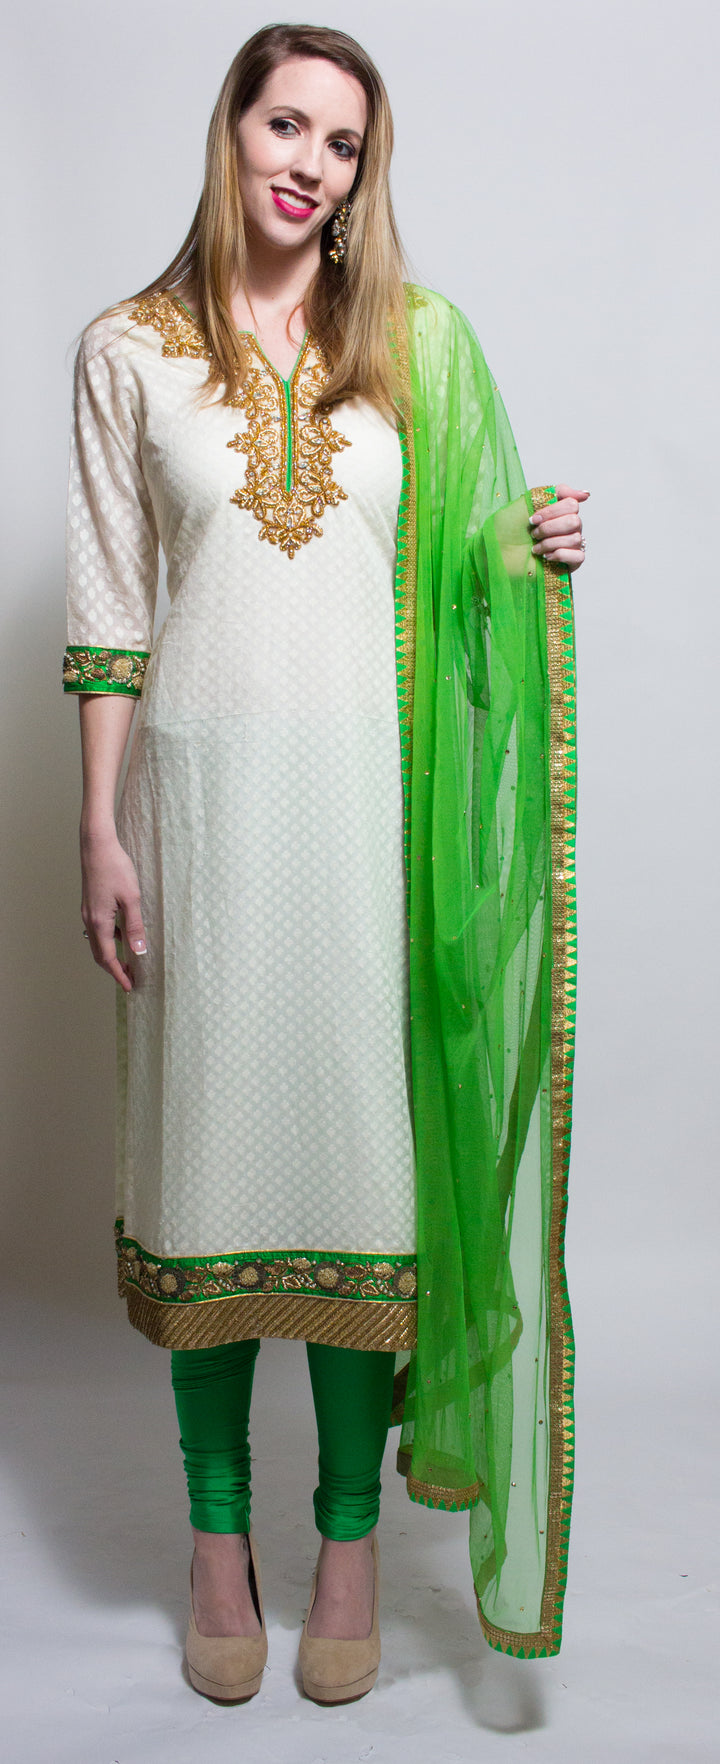 Chanderi Silk Kurta Adorned With Intricate Zardosi Work, Paired Elegantly With Pants And A Matching Dupatta - Rent